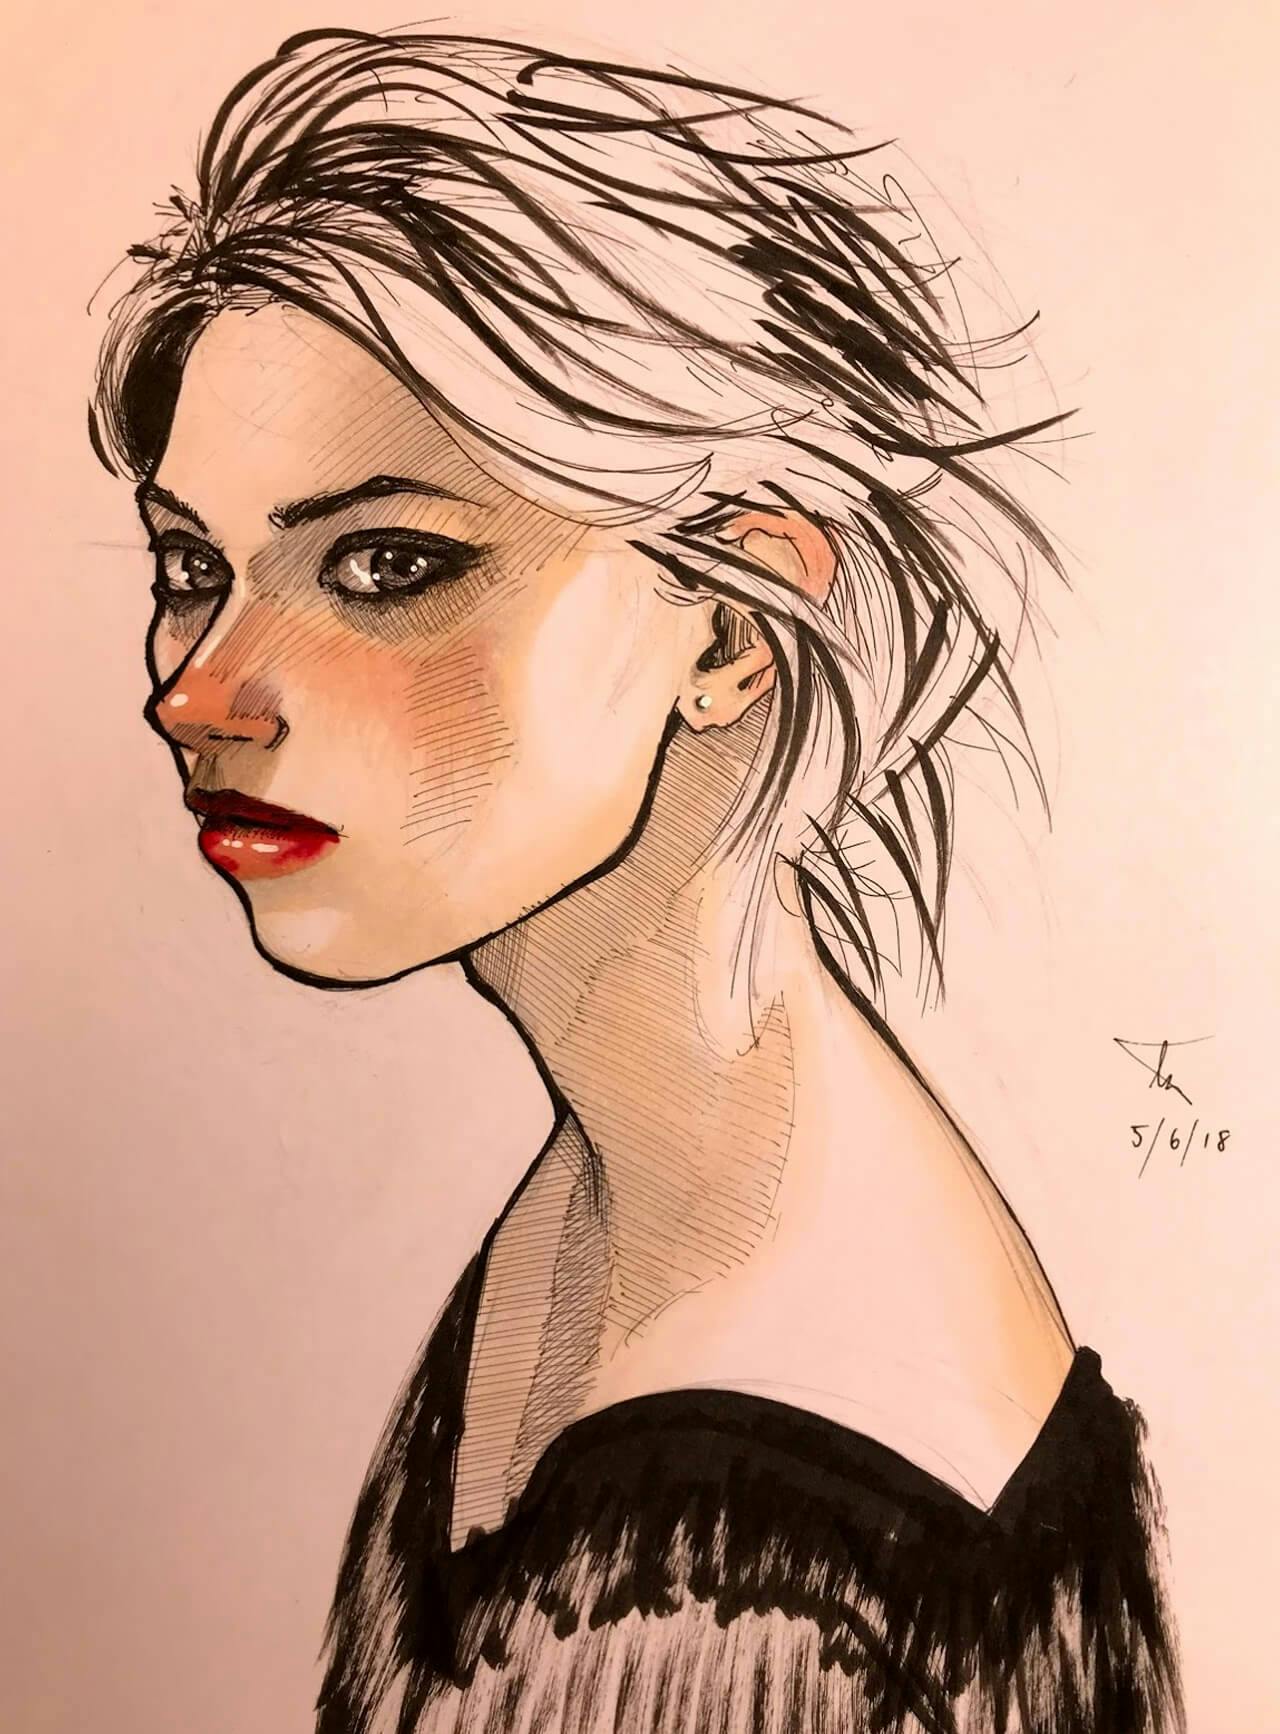 Ink & marker sketch, woman turned to the side looking back toward the viewer